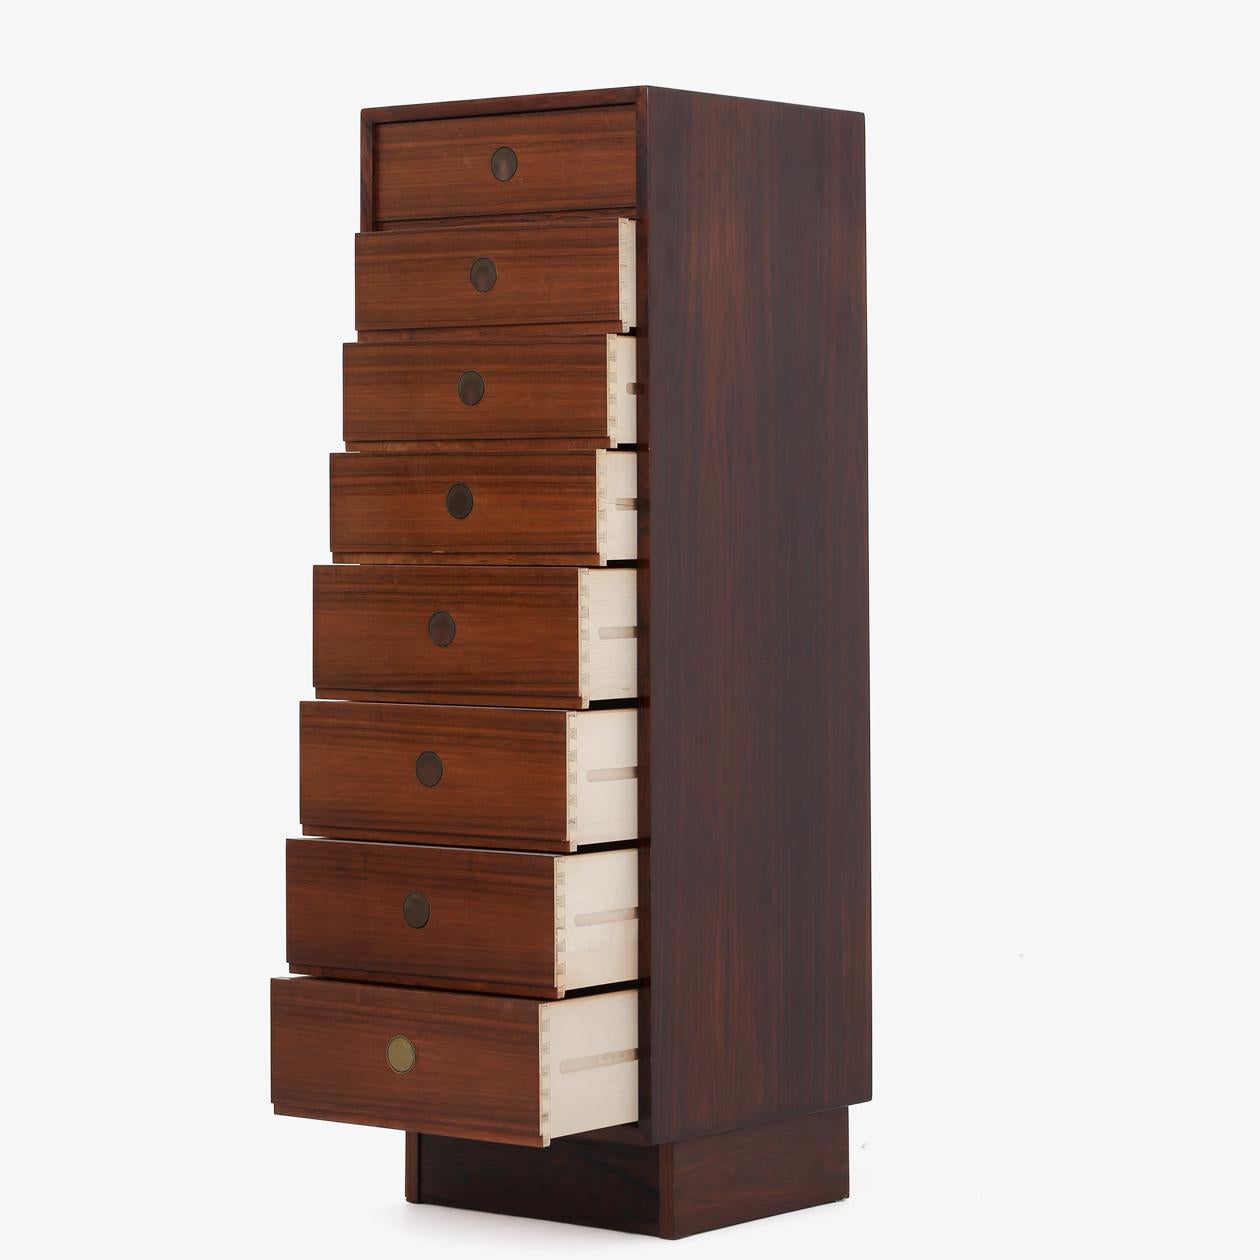 Tall chest of drawers in rosewood with brass handles. Maker Dyrlund.